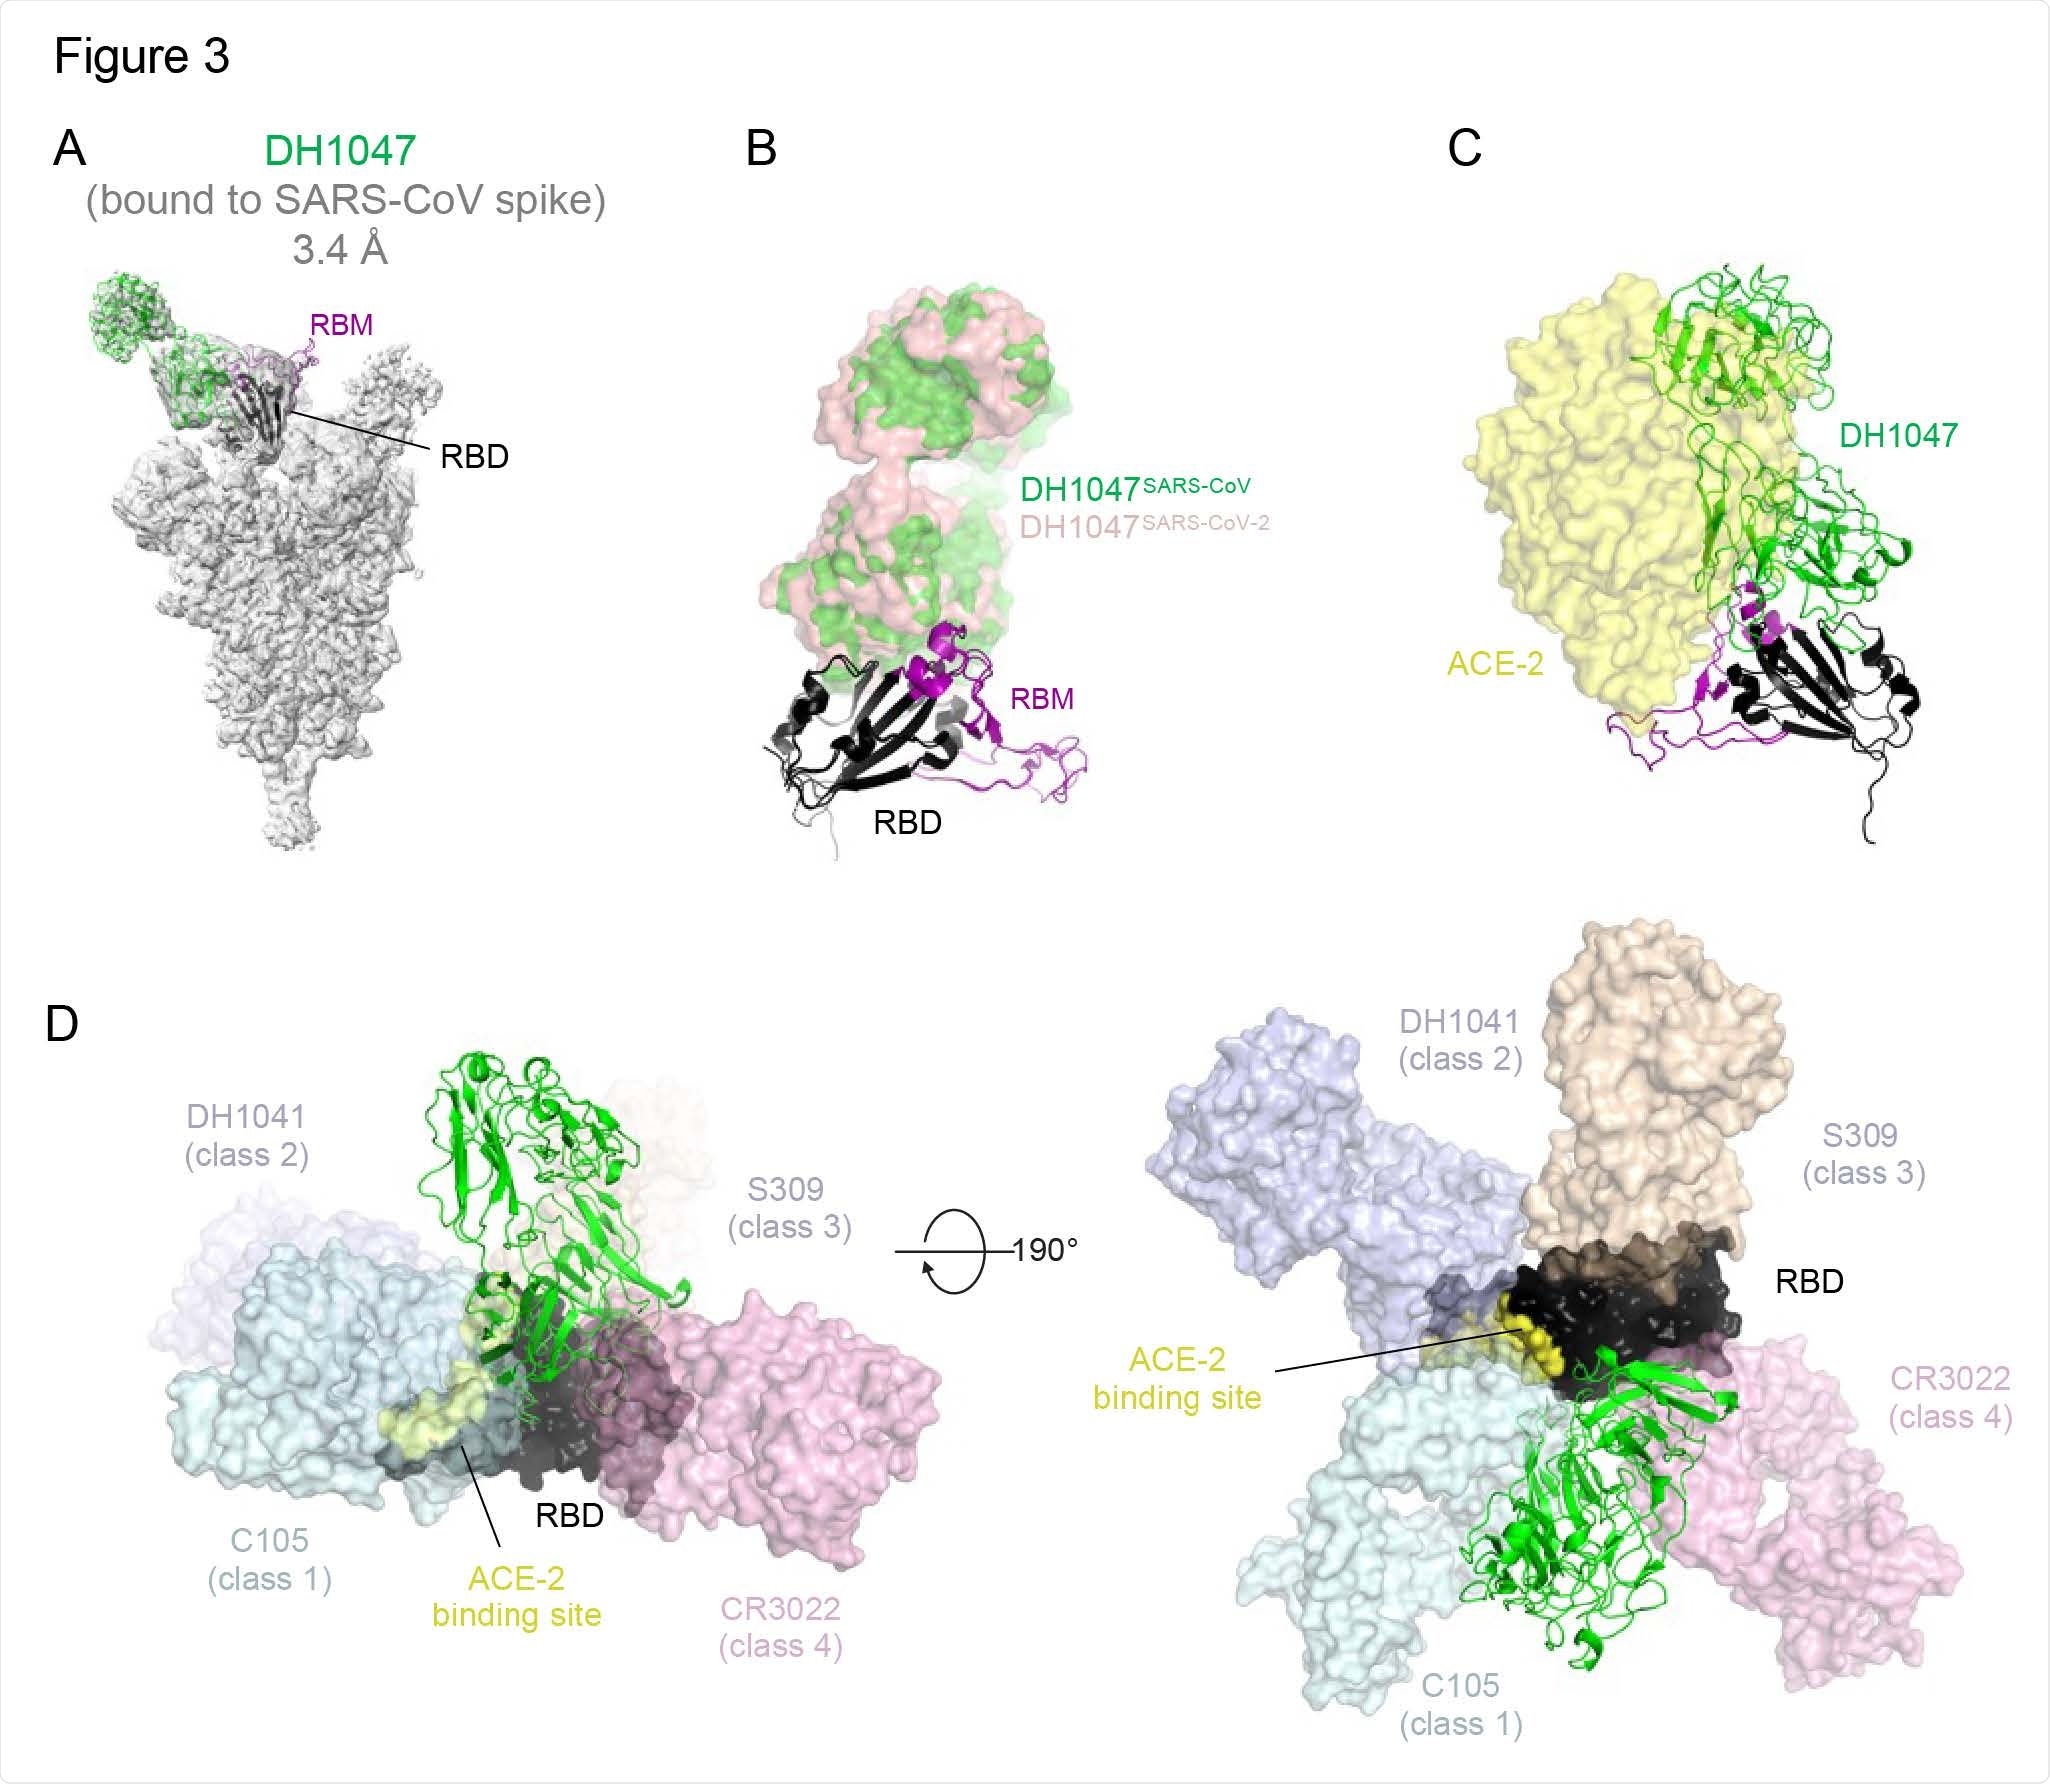 Cryo-EM structure of DH1047 bound to SARS-CoV spike. (A) Cryo-EM reconstruction of DH1047 Fab bound to SARS-CoV spike shown in grey, with the underlying fitted model shown in cartoon representation. DH1047 is colored green, the RBD it is bound to is colored black with the Receptor Binding Motif within the RBD colored purple. (B) Overlay of DH1047 bound to SARS-CoV-1 and SARS-CoV-2 (PDB ID: 7LDI) S proteins. Overlay was performed with the respective RBDs. DH1047 bound to SARS-CoV and SARS708 CoV-2 spike is shown in green and and salmon, respectively. (C) ACE2 (yellow surface representation, PDB 6VW1) binding to RBD is sterically hindered by DH1047. The views in panels B and C are related by a ~180º rotation about the vertical axis. (D) DH1047 binding relative to binding of other known antibody classes that bind the RBD. RBD is shown in black with the ACE2 footprint on the RBD colored yellow. DH1047 is shown in cartoon representation and colored green. The other antibodies and shown as transparent surfaces: C105 (pale cyan, Class 1, PDB ID: 6XCN and 6XCA), DH1041 (light blue, Class 2, PDB ID: 7LAA), S309 (wheat, Class 3, PDB ID:6WS6 and 6WPT) and CR3022 (pink, Class 4 , PDB ID: 6YLA)